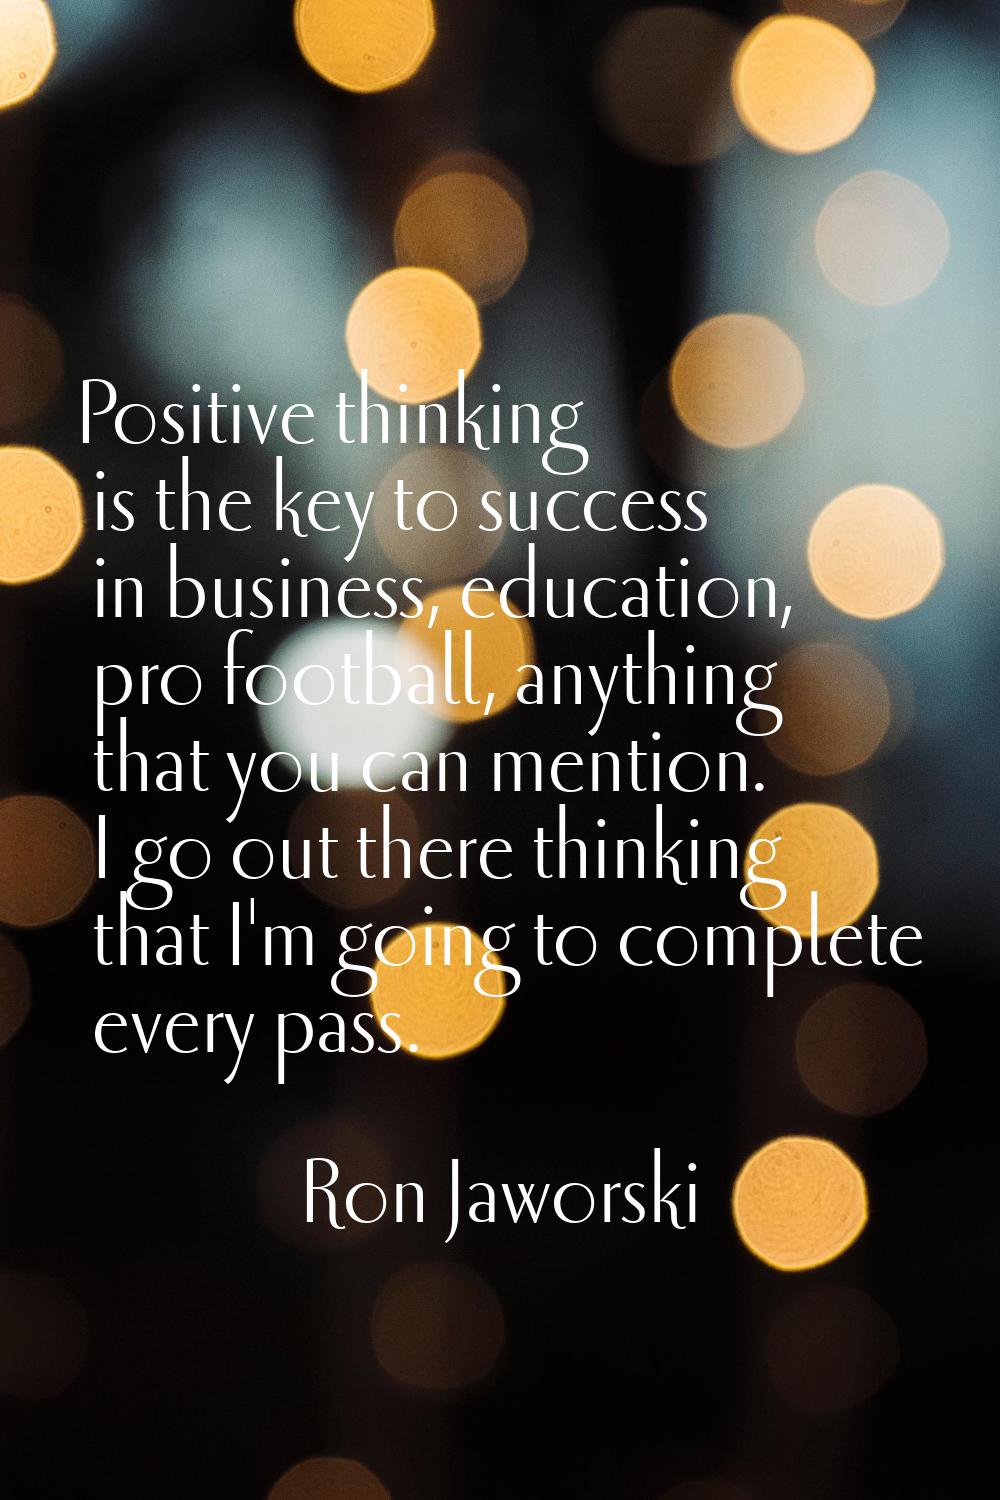 Positive thinking is the key to success in business, education, pro football, anything that you can